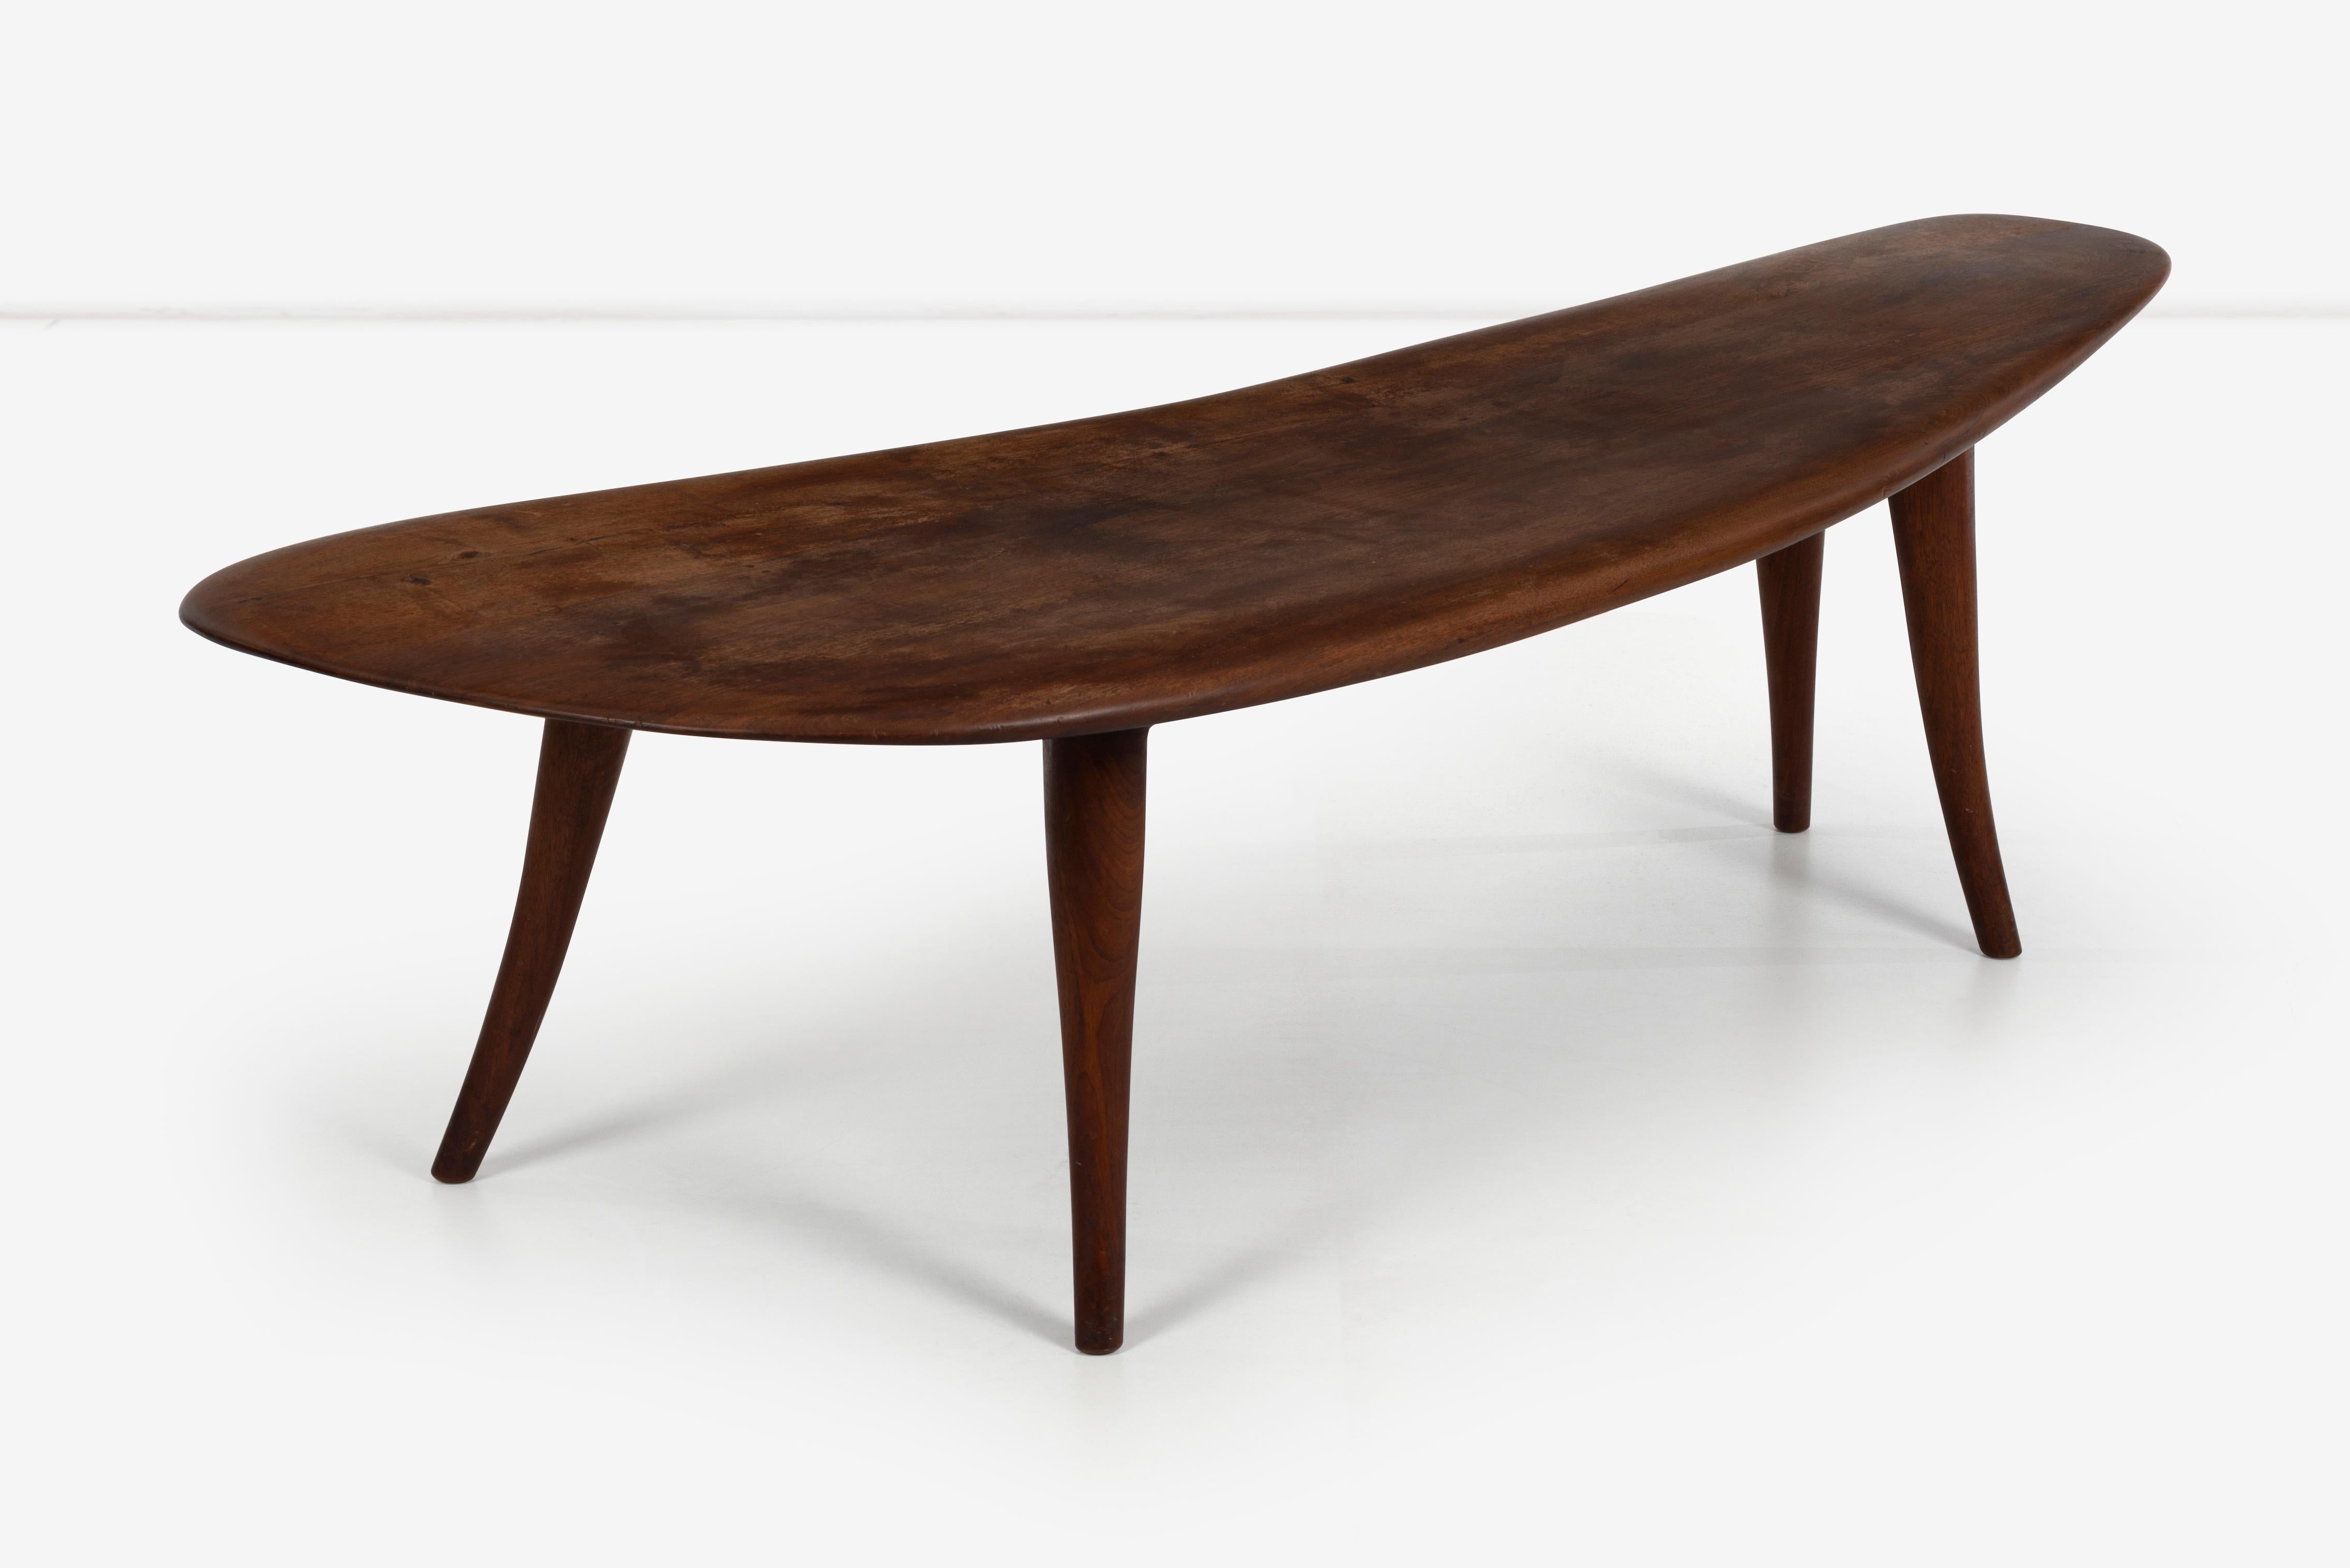 Wharton Esherick Large Sculpted Walnut Coffee Table In Good Condition For Sale In Chicago, IL